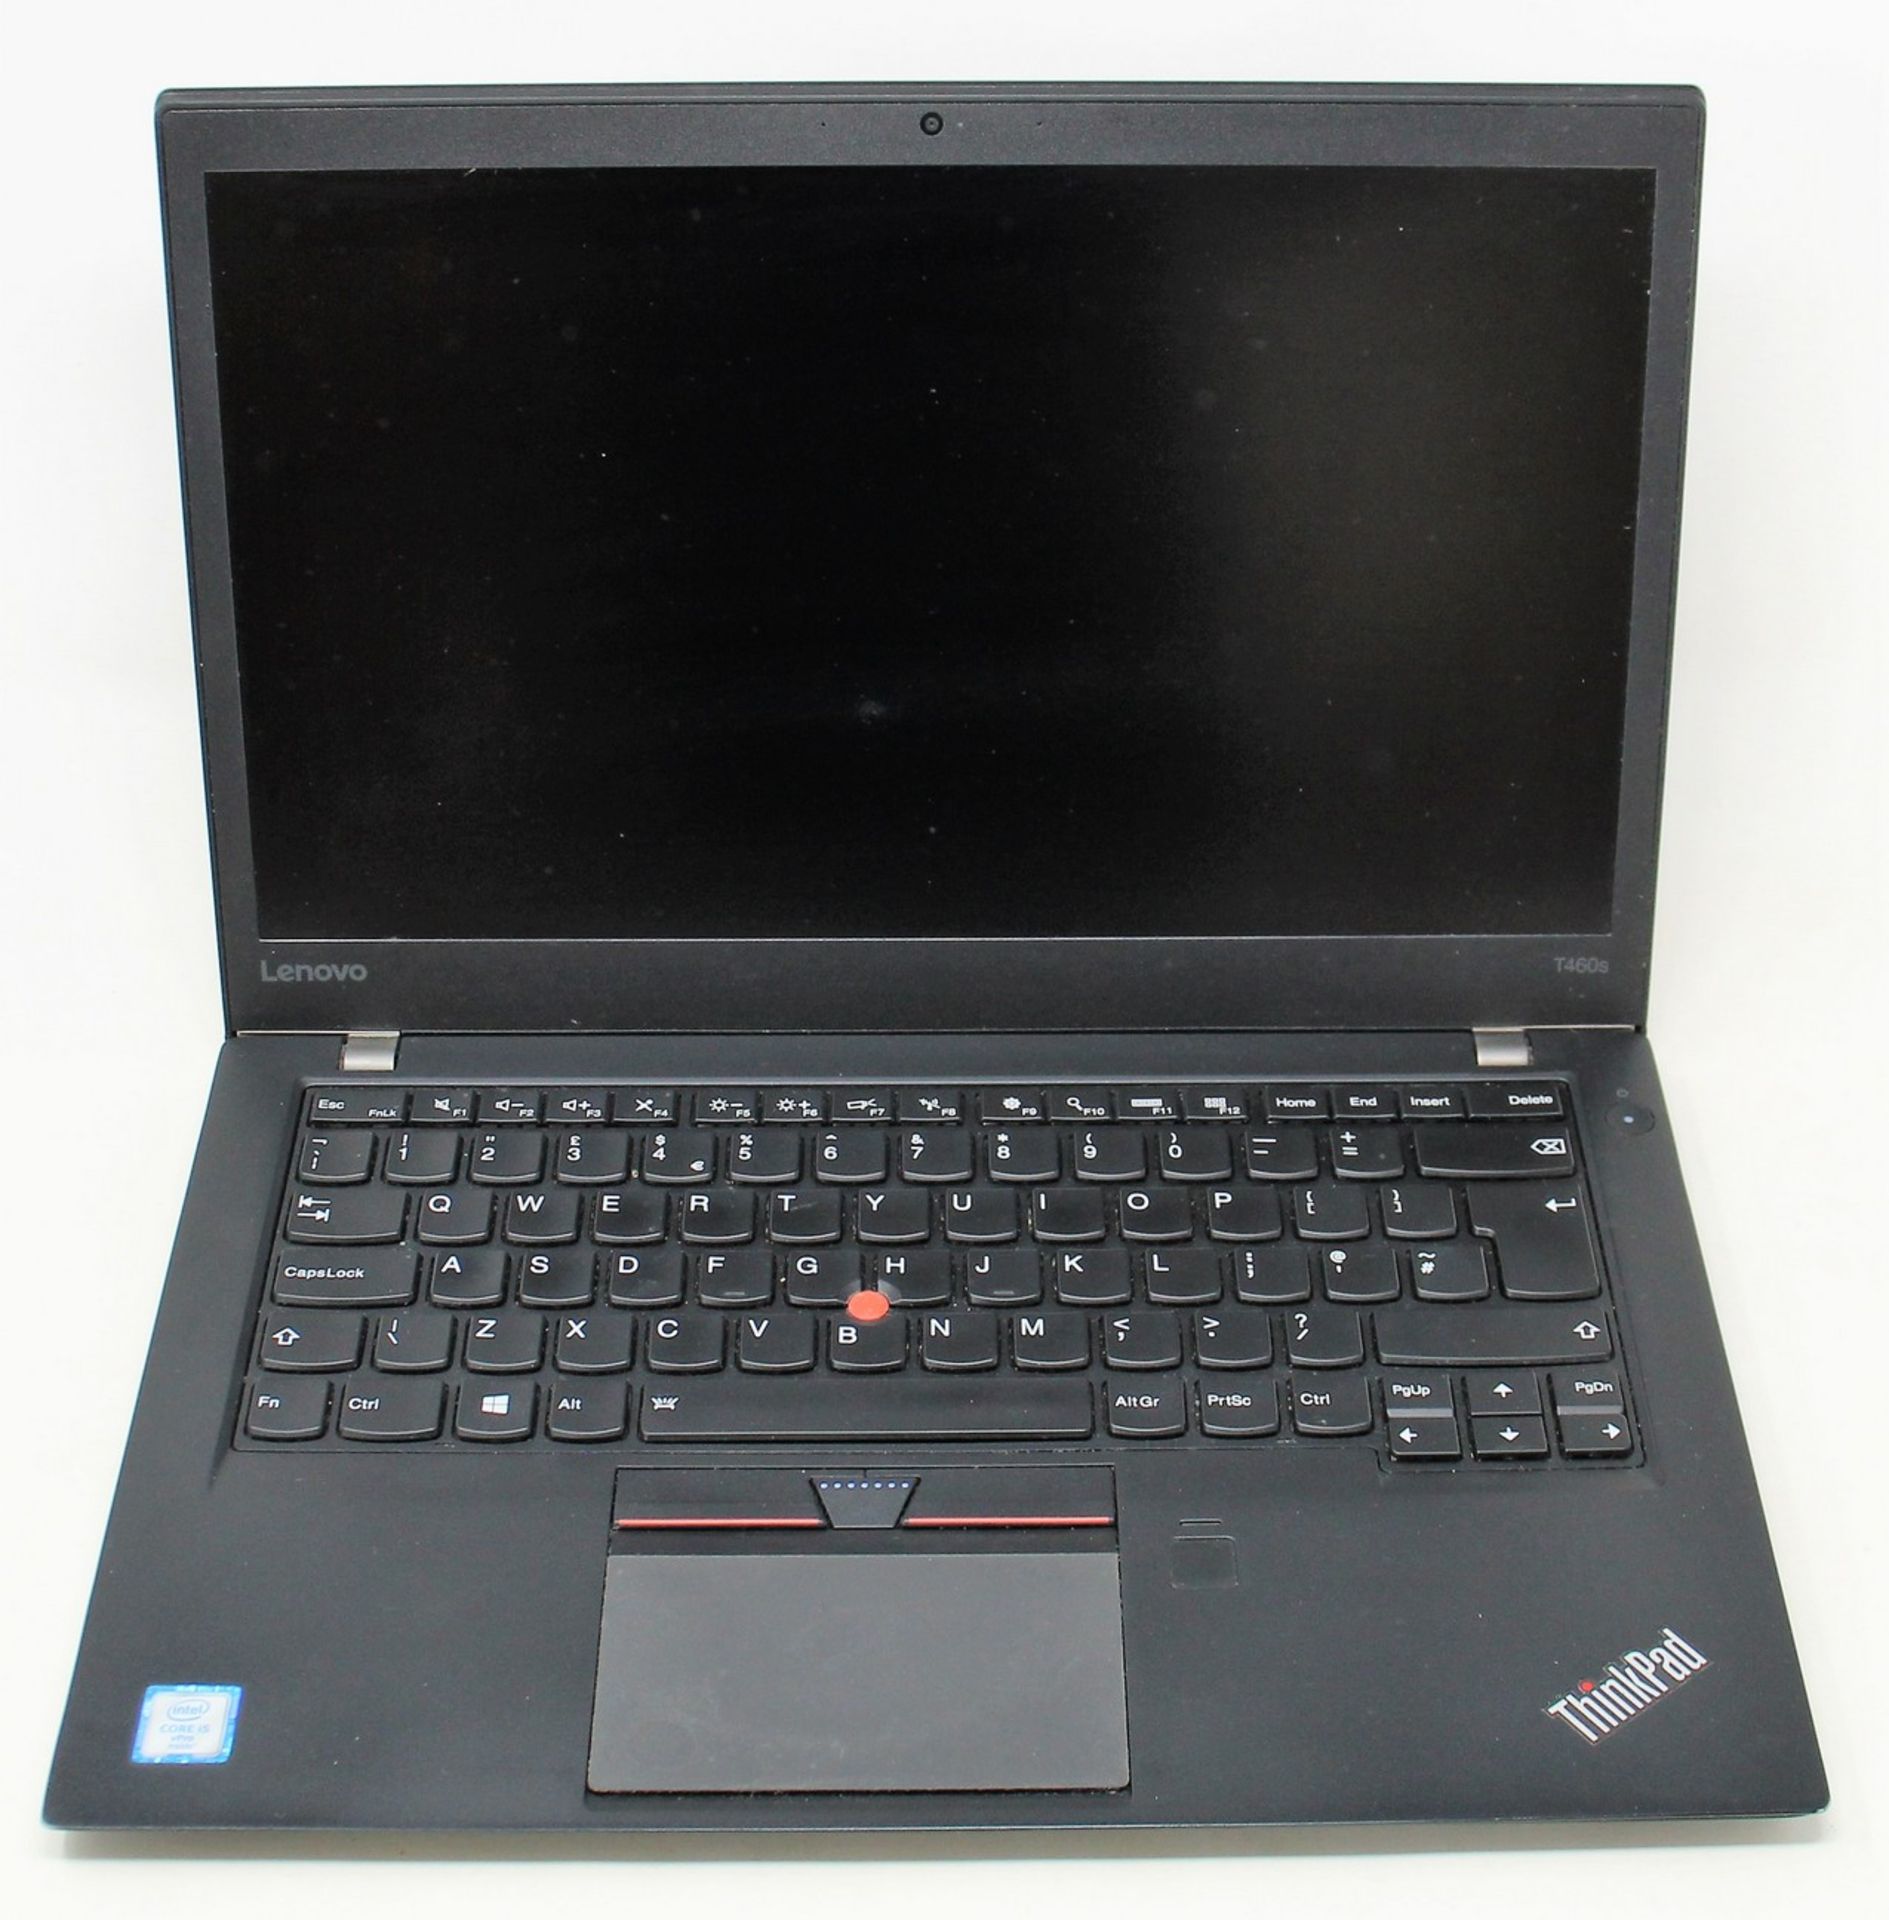 A pre-owned 12.5" Lenovo T460s ThinkPad notebook in black with Intel i5-6300U 2.4GHz processor,